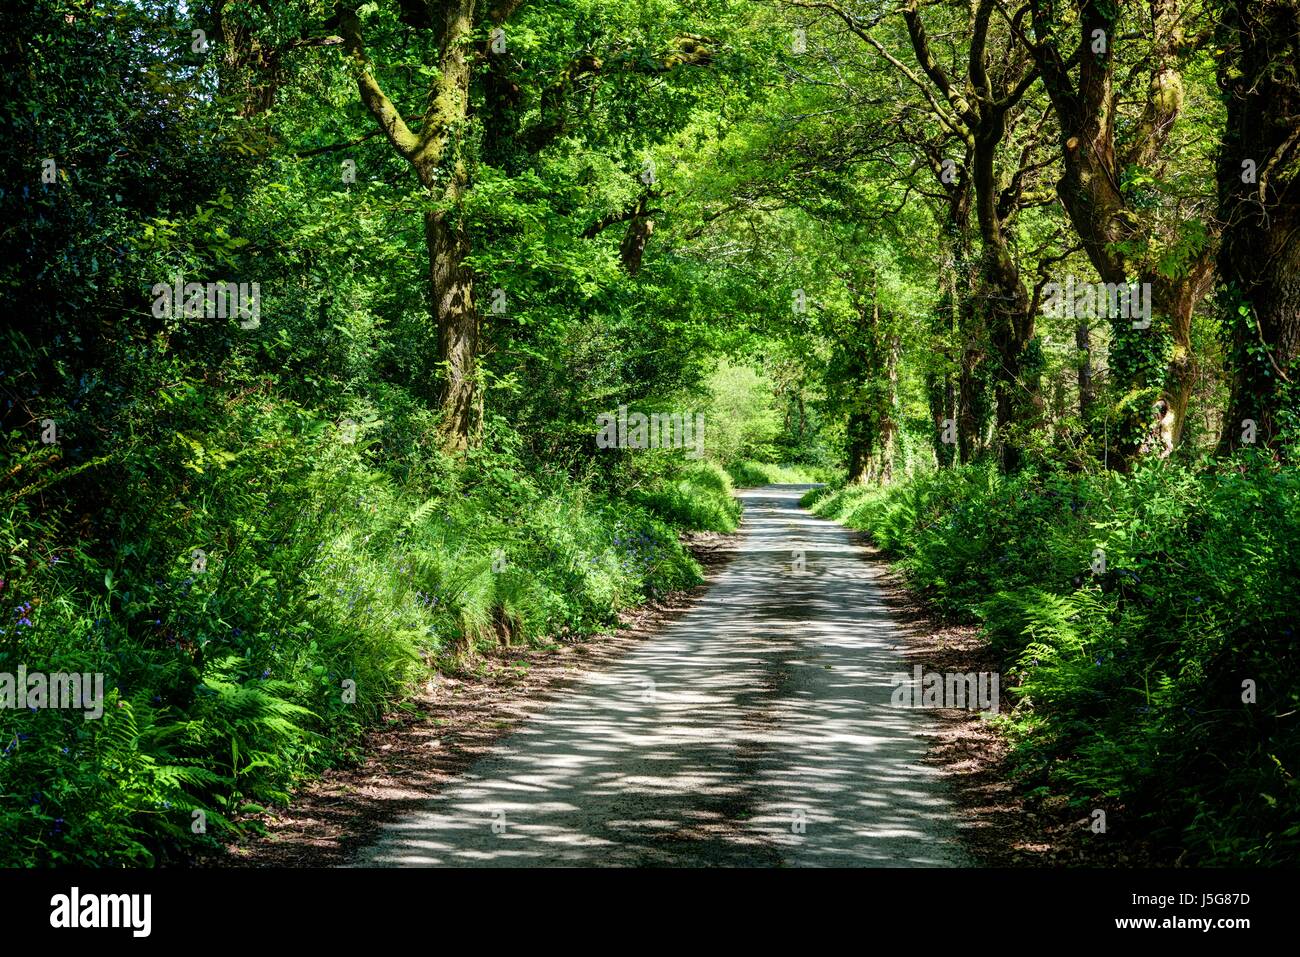 A tree lined fresh green leafy country lane with strong dappled sunlight breaking through on to the straight track ahead. Ladock, Cornwall, England. Stock Photo